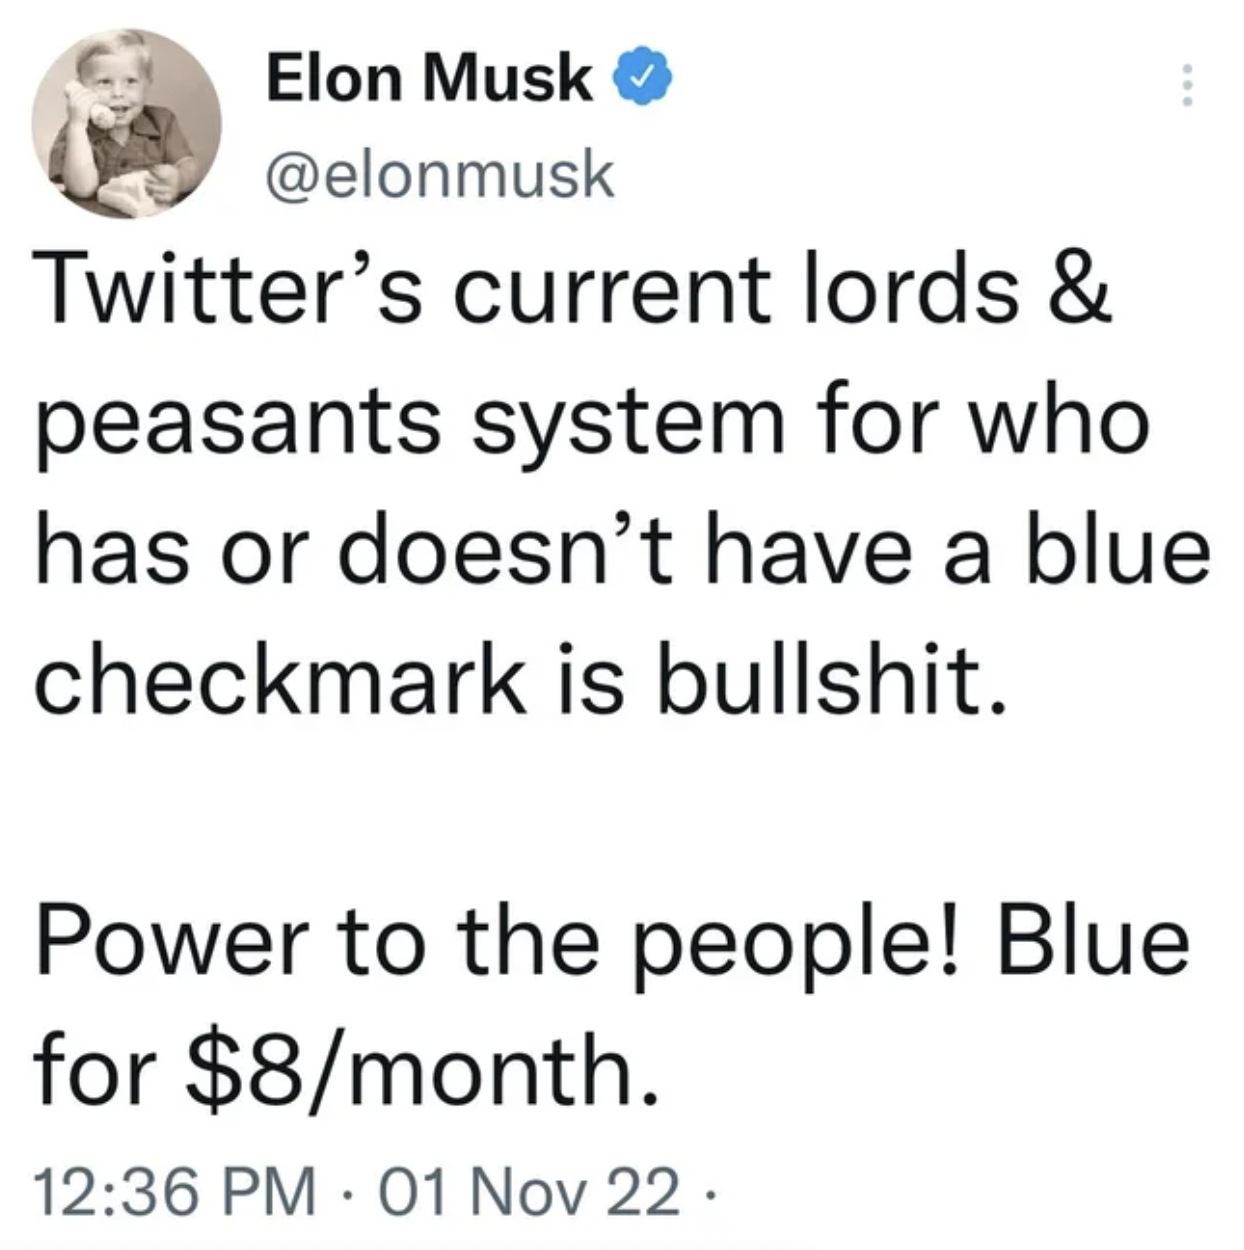 Cringey Pics - \ current lords & peasants system for who has or doesn't have a blue checkmark is bullshit. Power to the people! Blue for $8month.